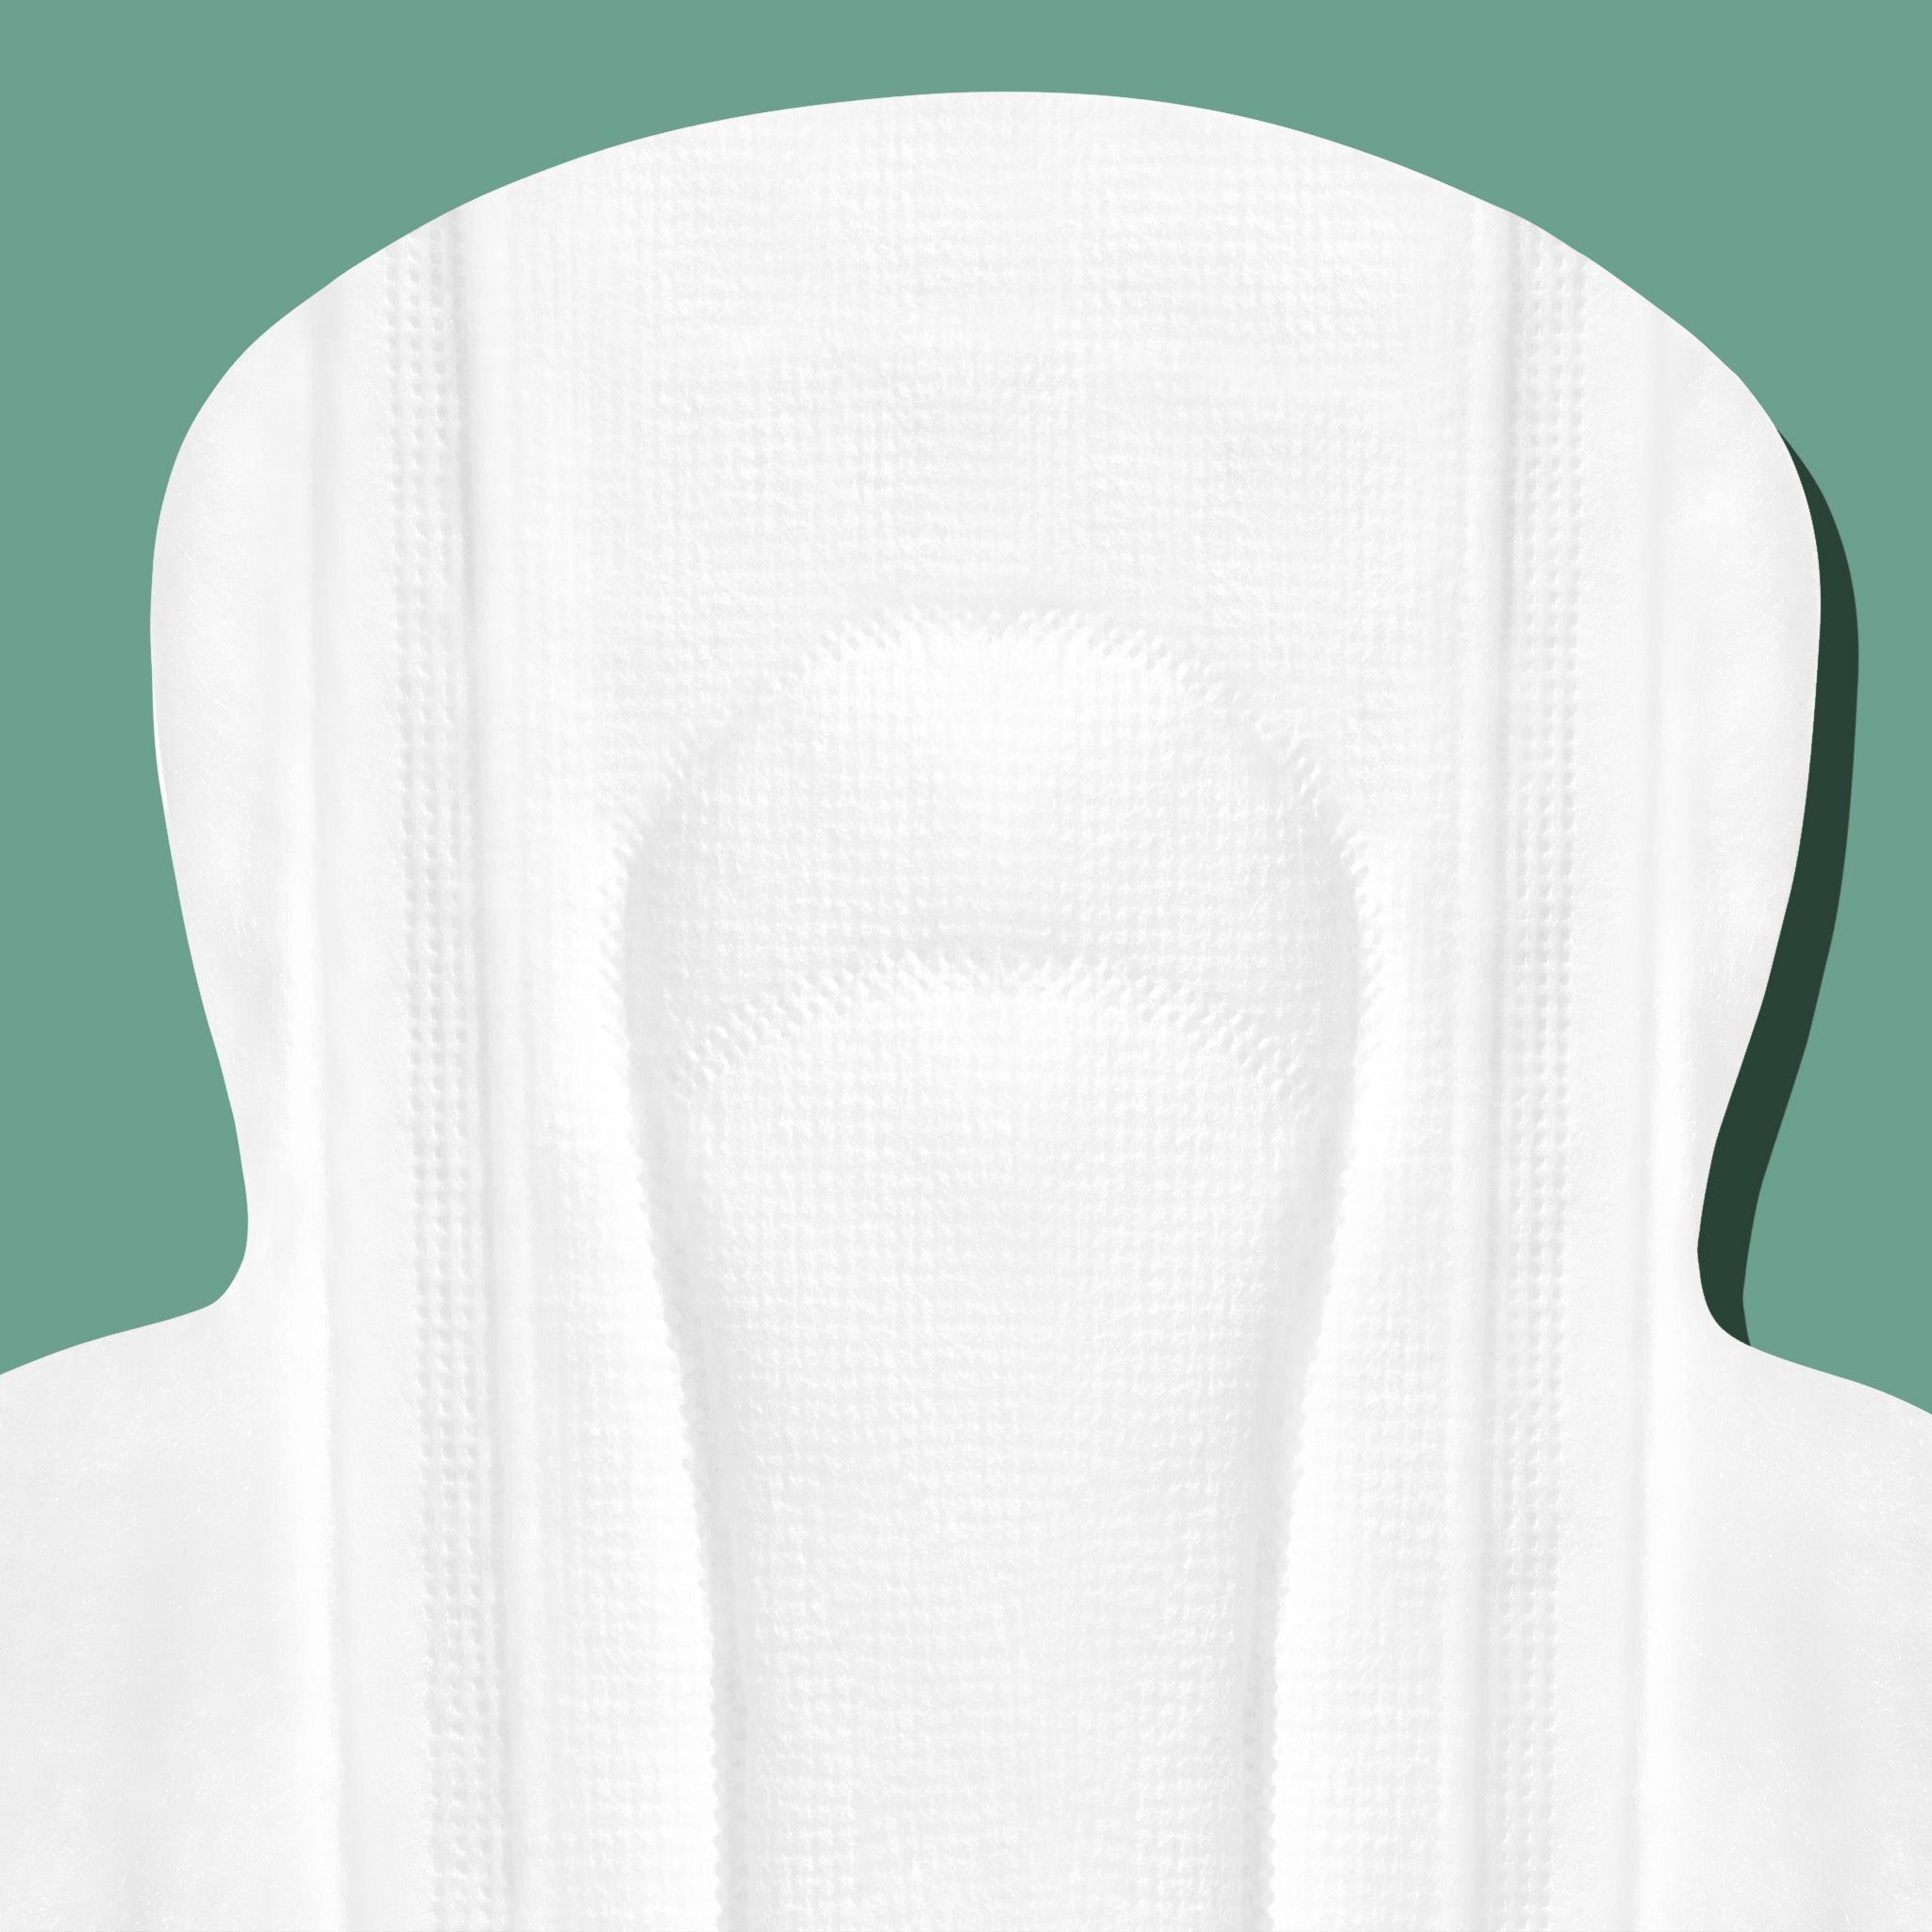 Organic Cotton Cover Pads